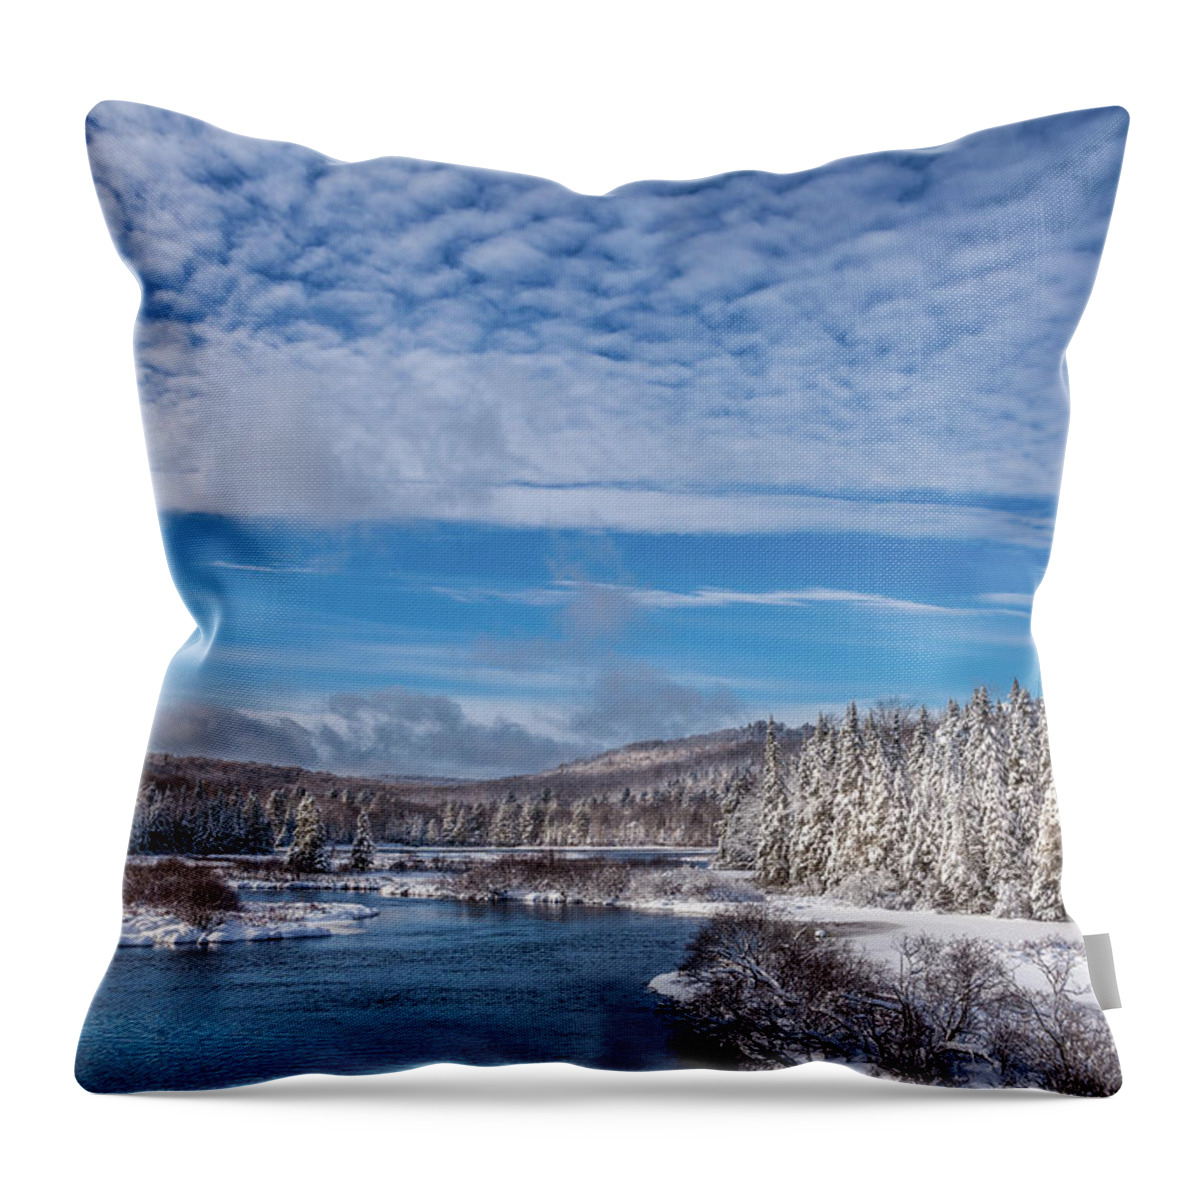 November Snow Throw Pillow featuring the photograph November Snow by David Patterson